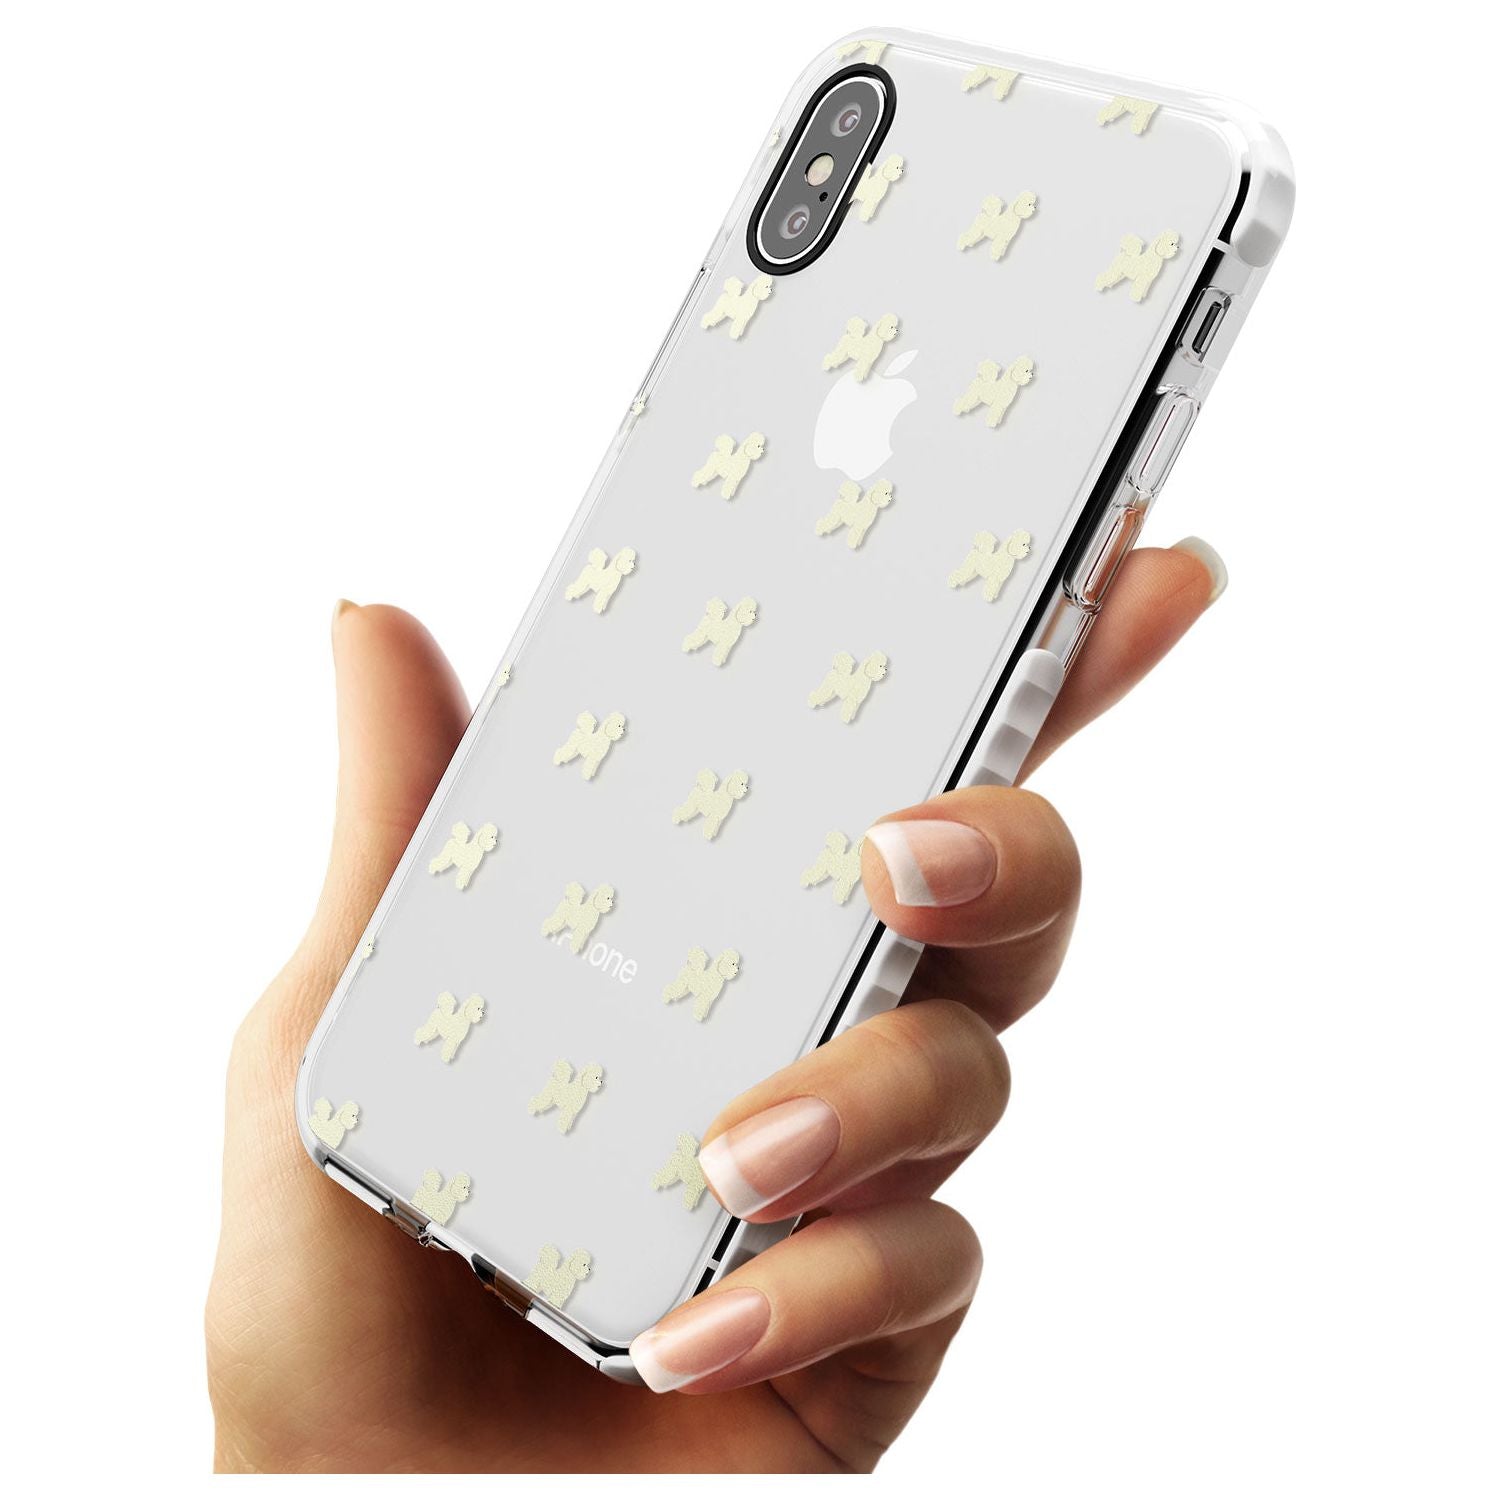 Bichon Frise Dog Pattern Clear Impact Phone Case for iPhone X XS Max XR